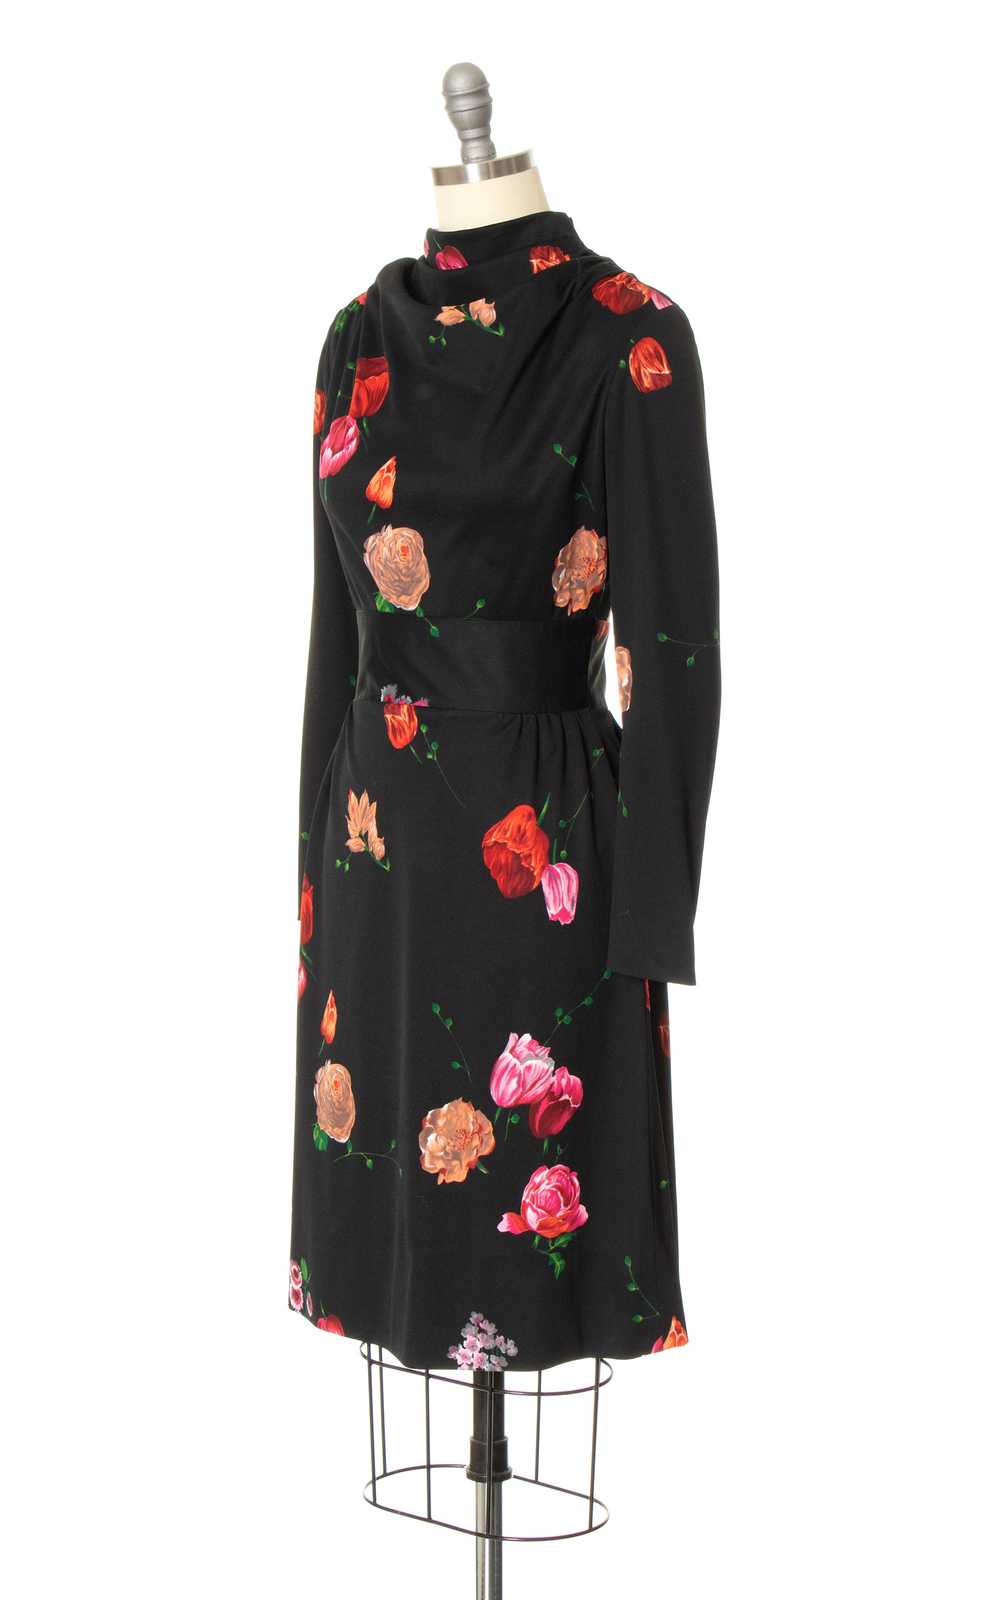 1970s Floral Jersey Dress | x-small/small - image 3